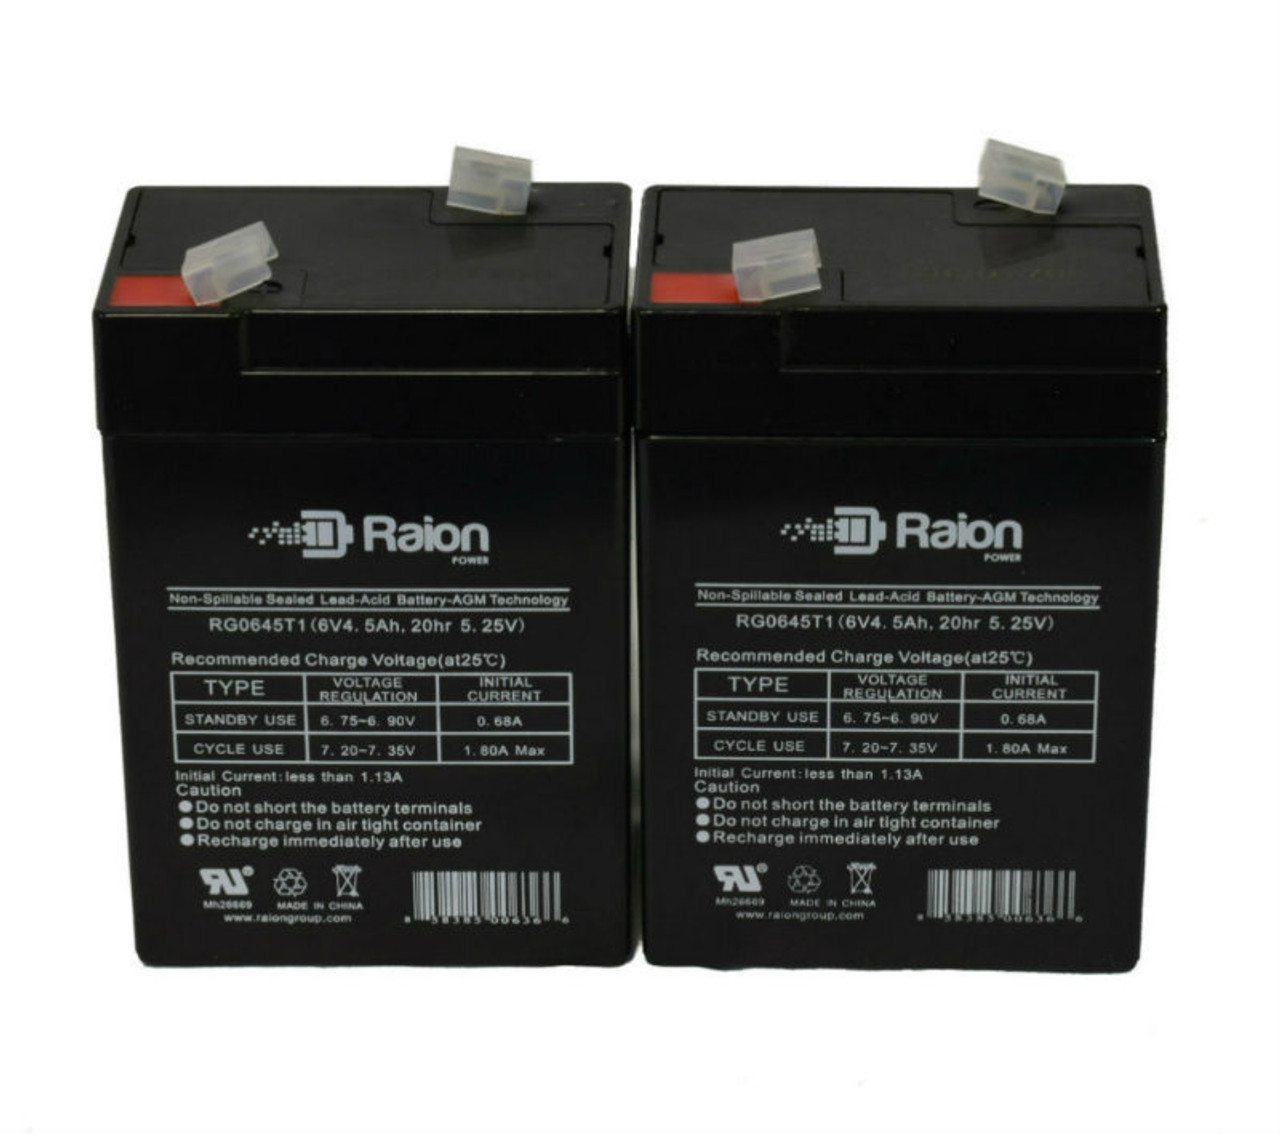 Raion Power 6V 4.5Ah Replacement Emergency Light Battery for Lithonia AQM EL - 2 Pack